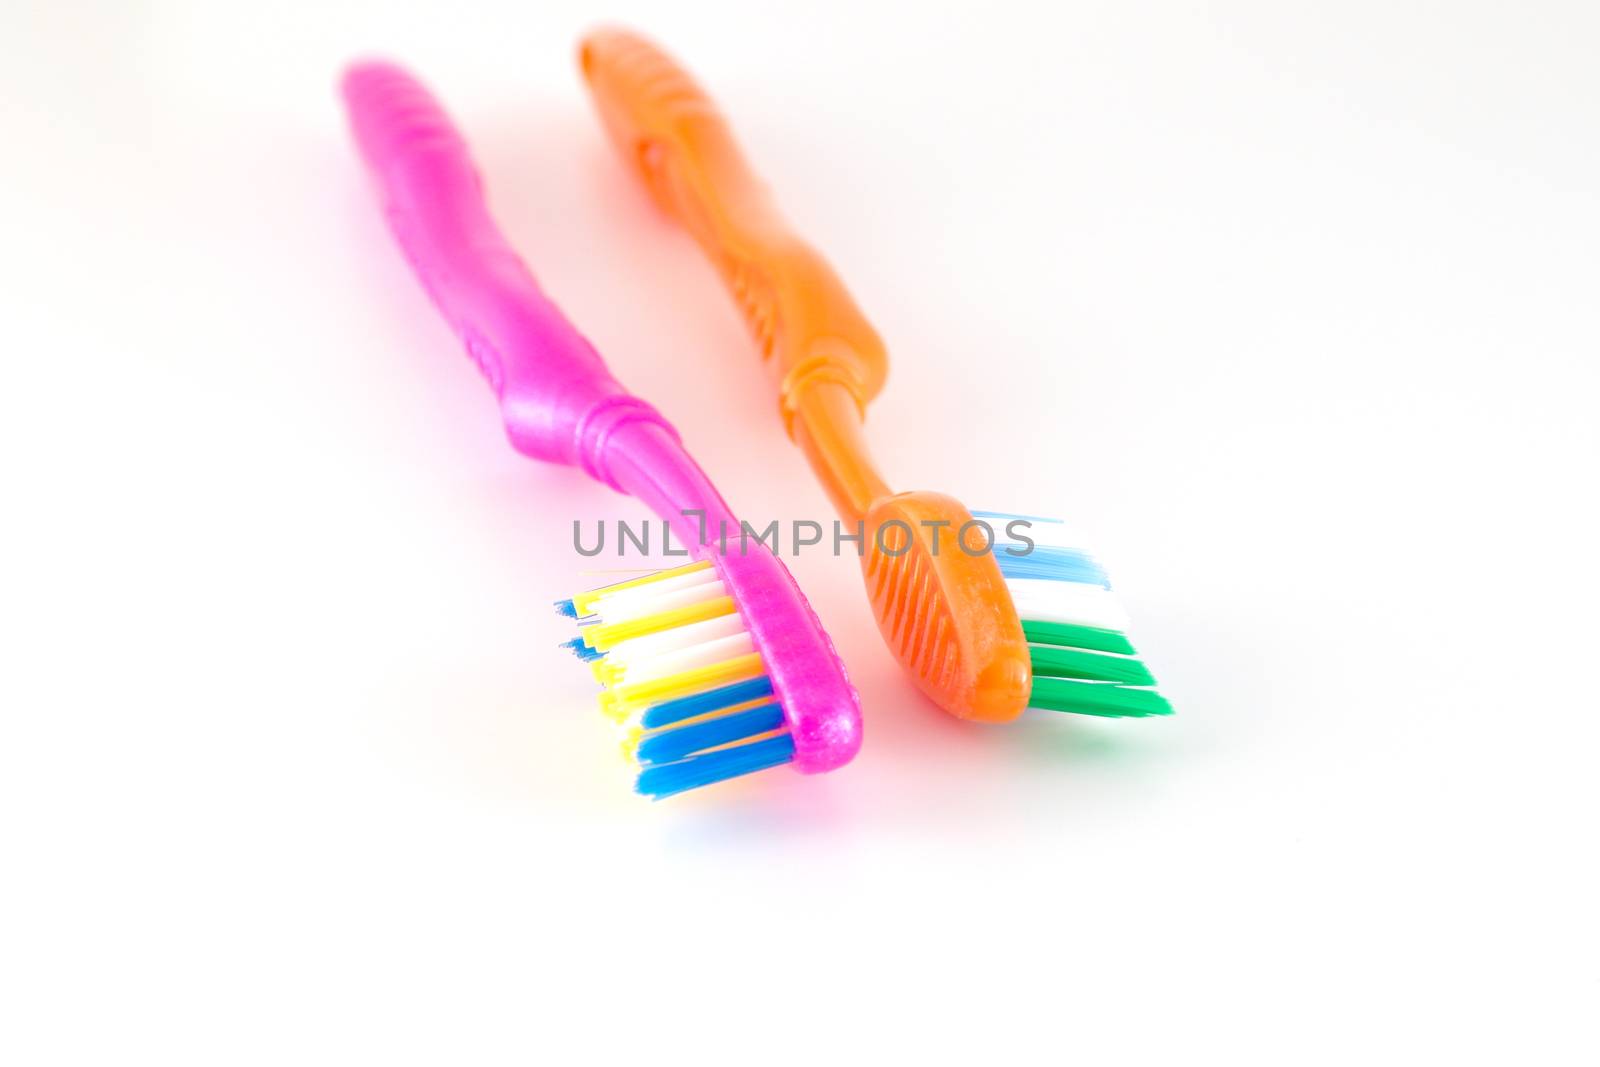 Two tooth-brushes over white